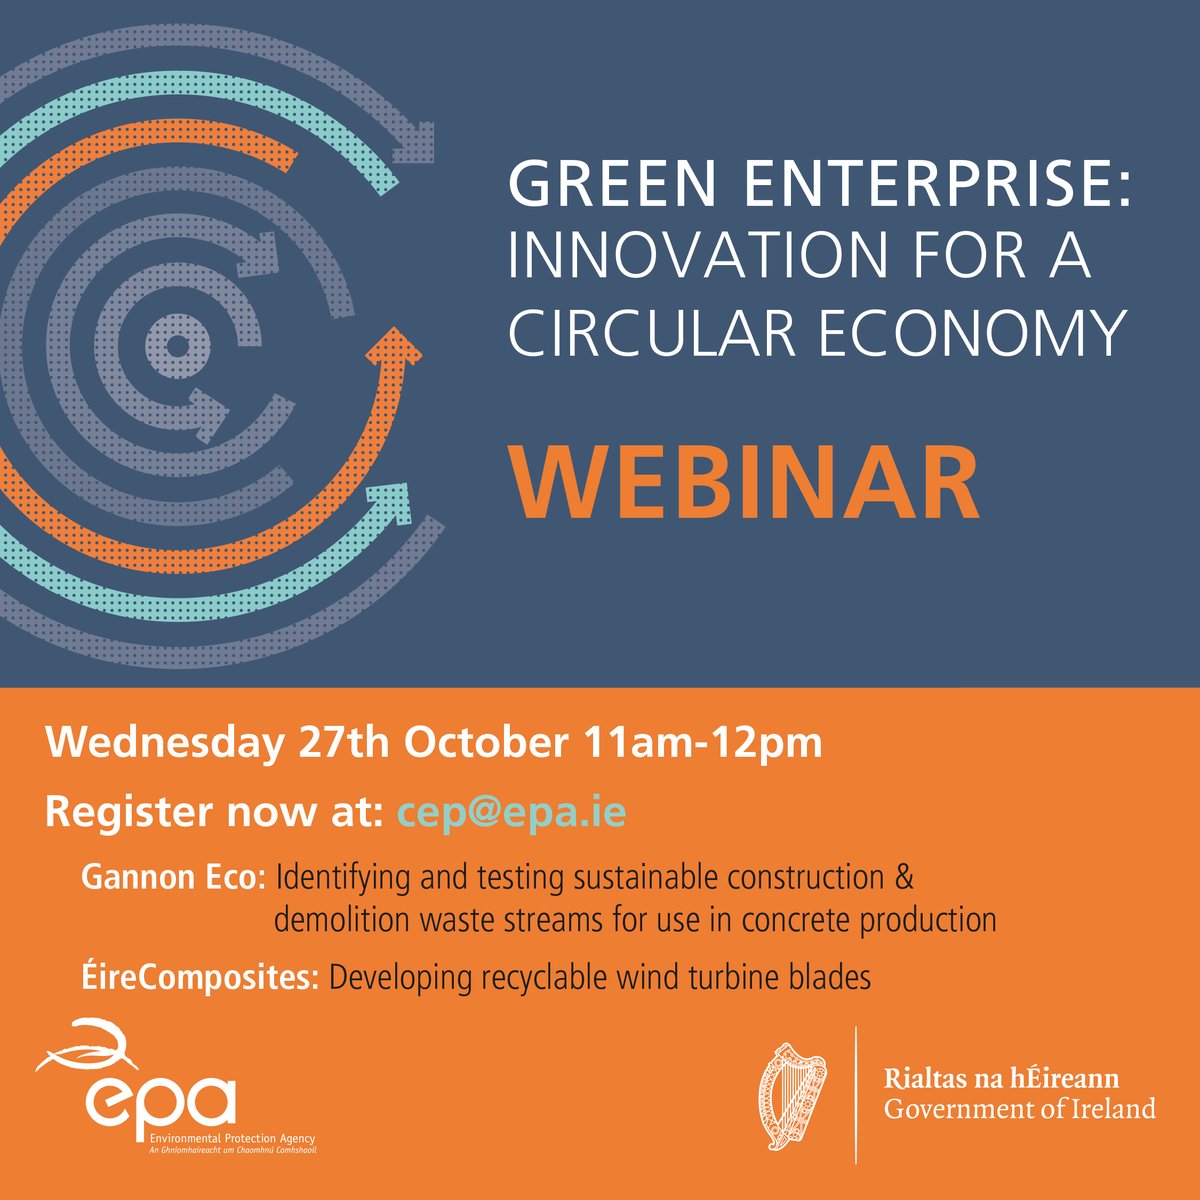 📢 Calling all sustainability entrepreneurs! The EPA Circular Economy Programme will host a free webinar on 27th October showccasing two Green Enterprise projects: 👉@GannonEco 👉@EireComposites Register at: cep@epa.ie #CircularEconomy